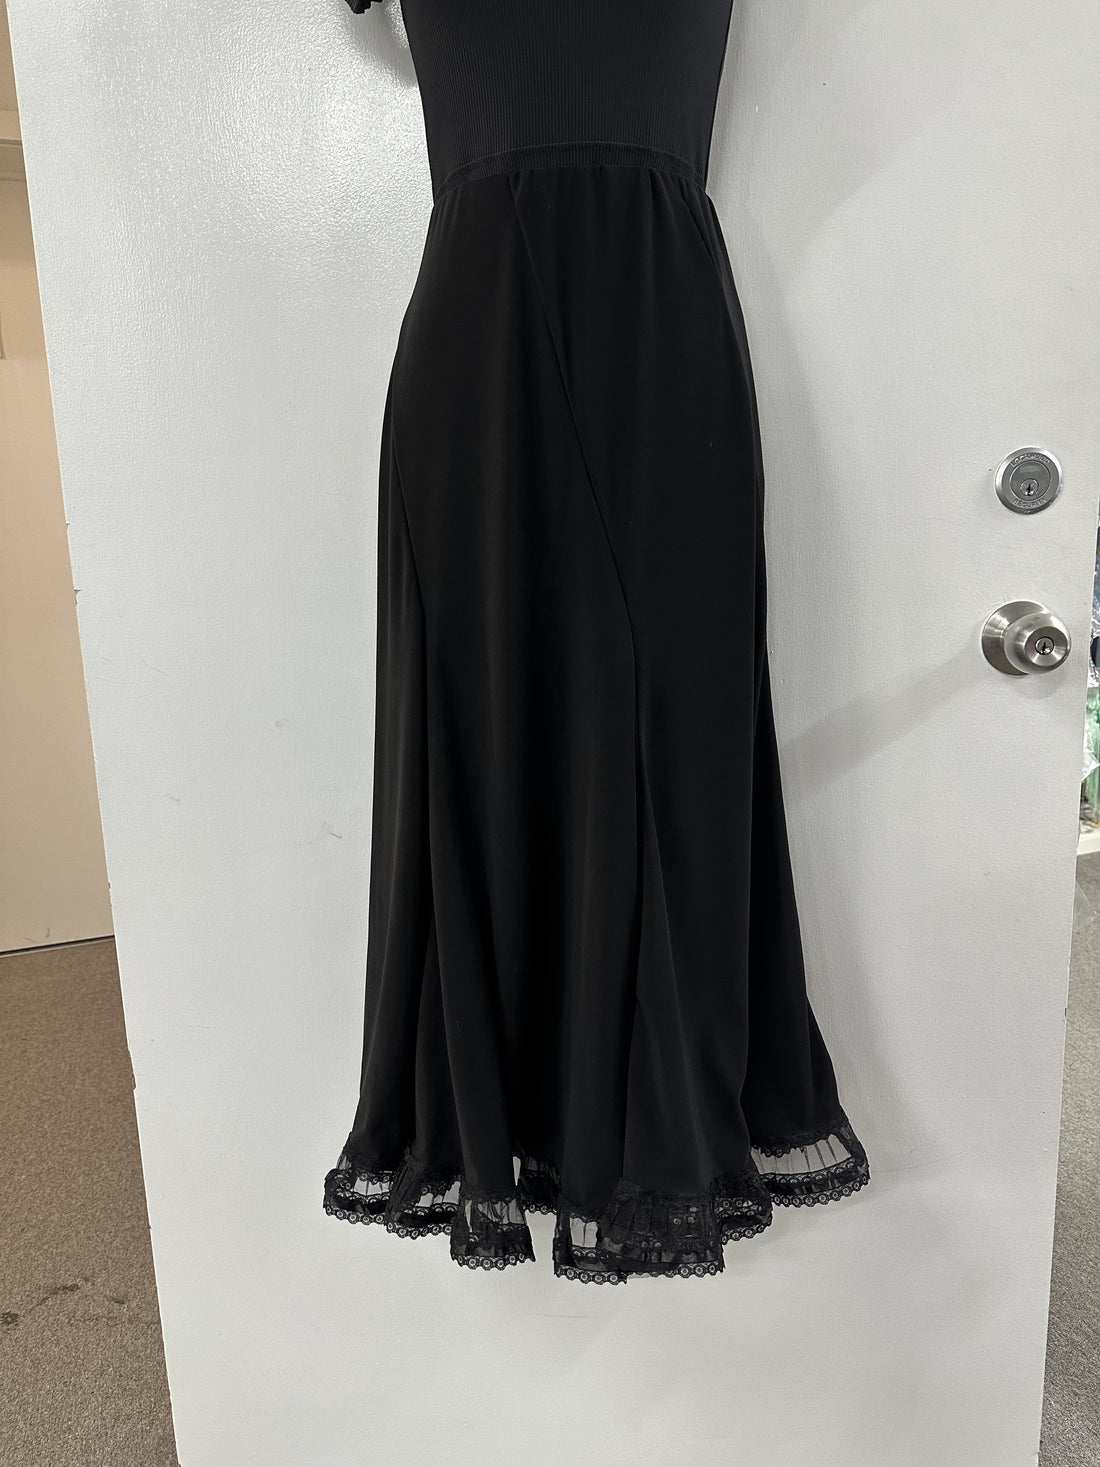 Miana Ballroom Skirt with Lace Edging